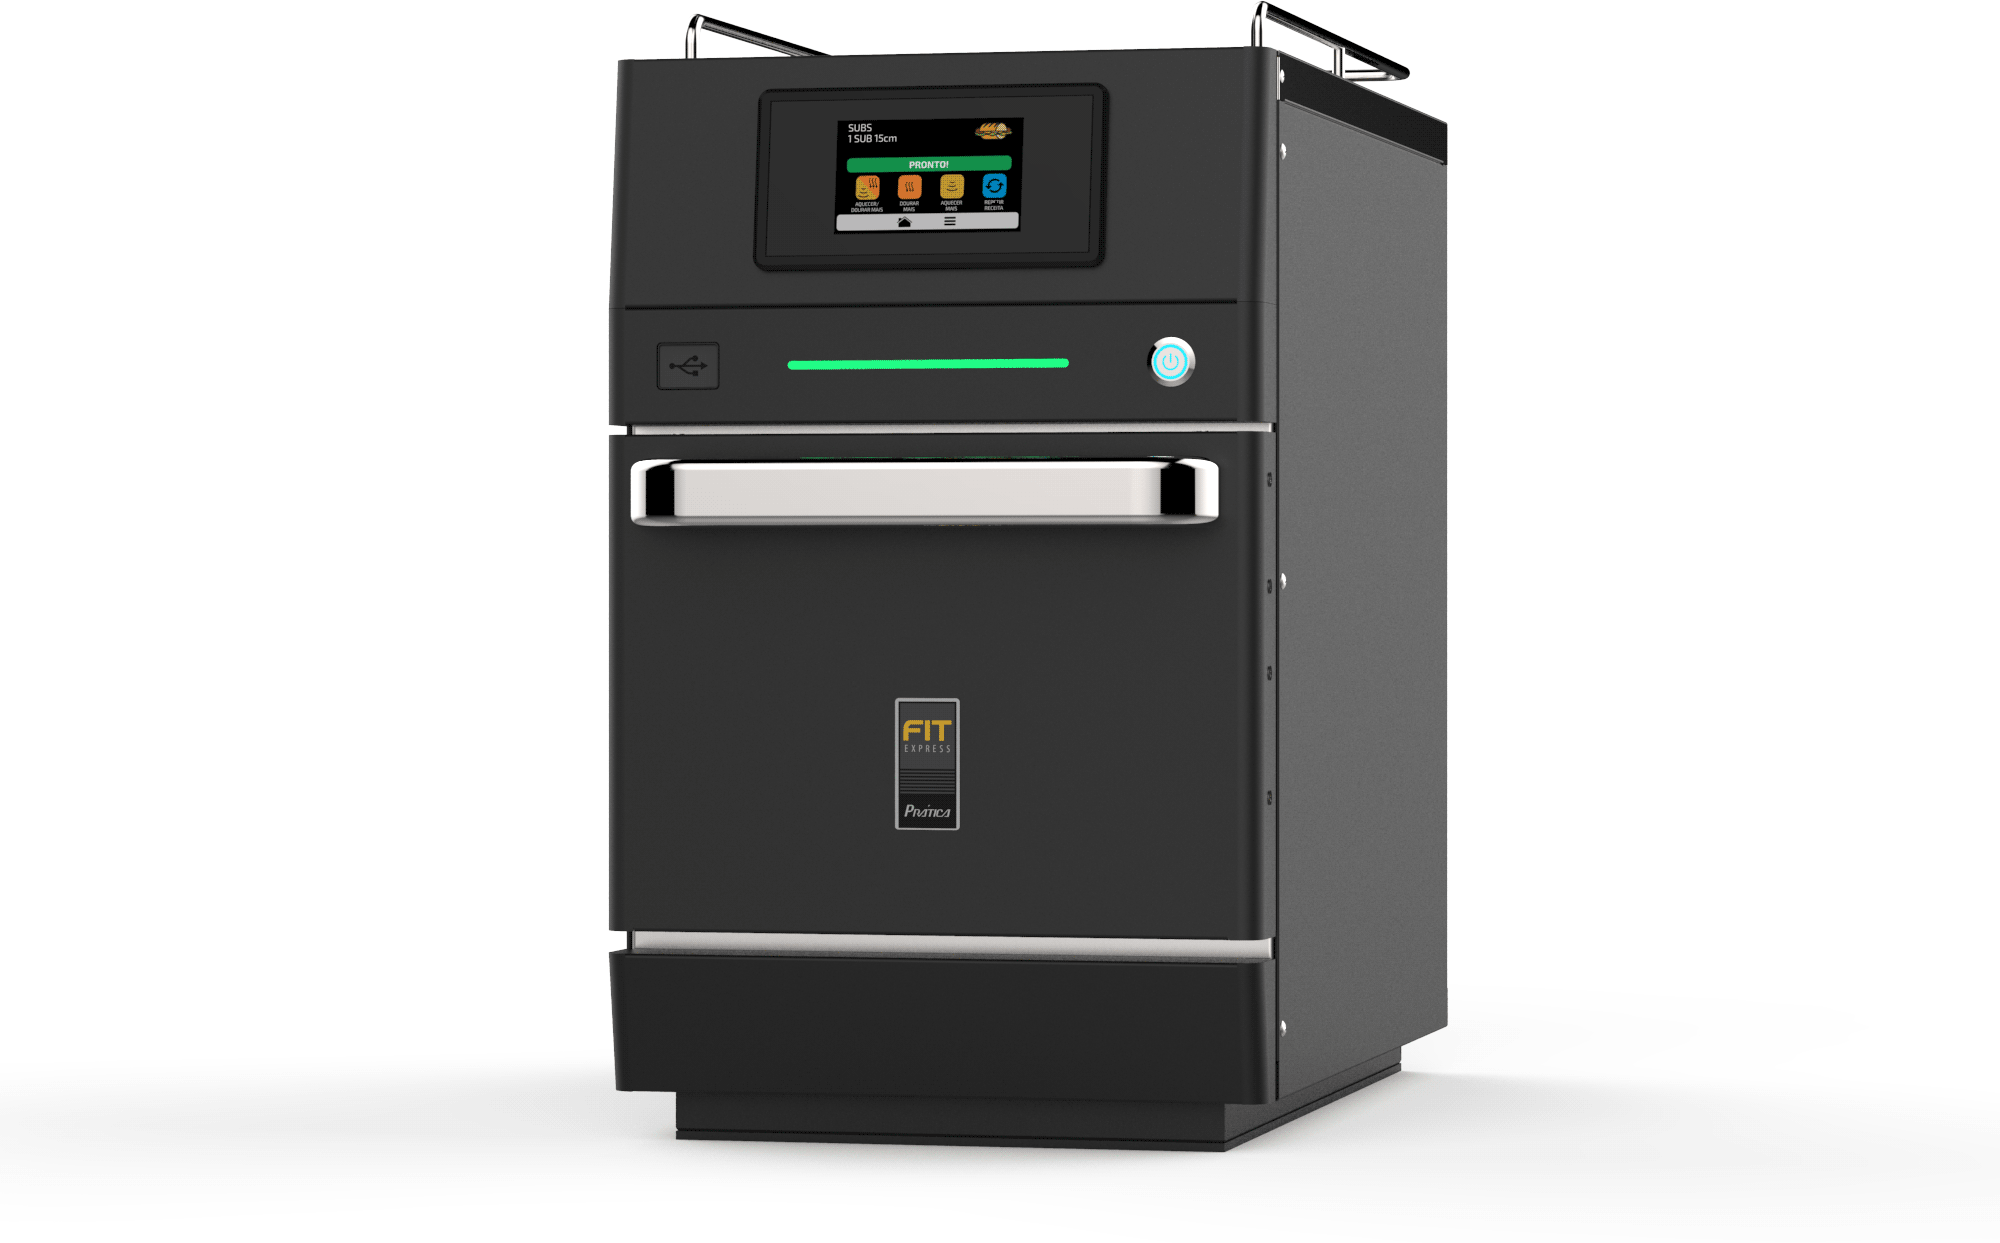 https://www.hospitalitydirectory.com.au/images/product_images/JLLennard/Product-News/2024/2024Mar19_High-Speed-Ovens/JLLennard_High-Speed-Ovens1.gif